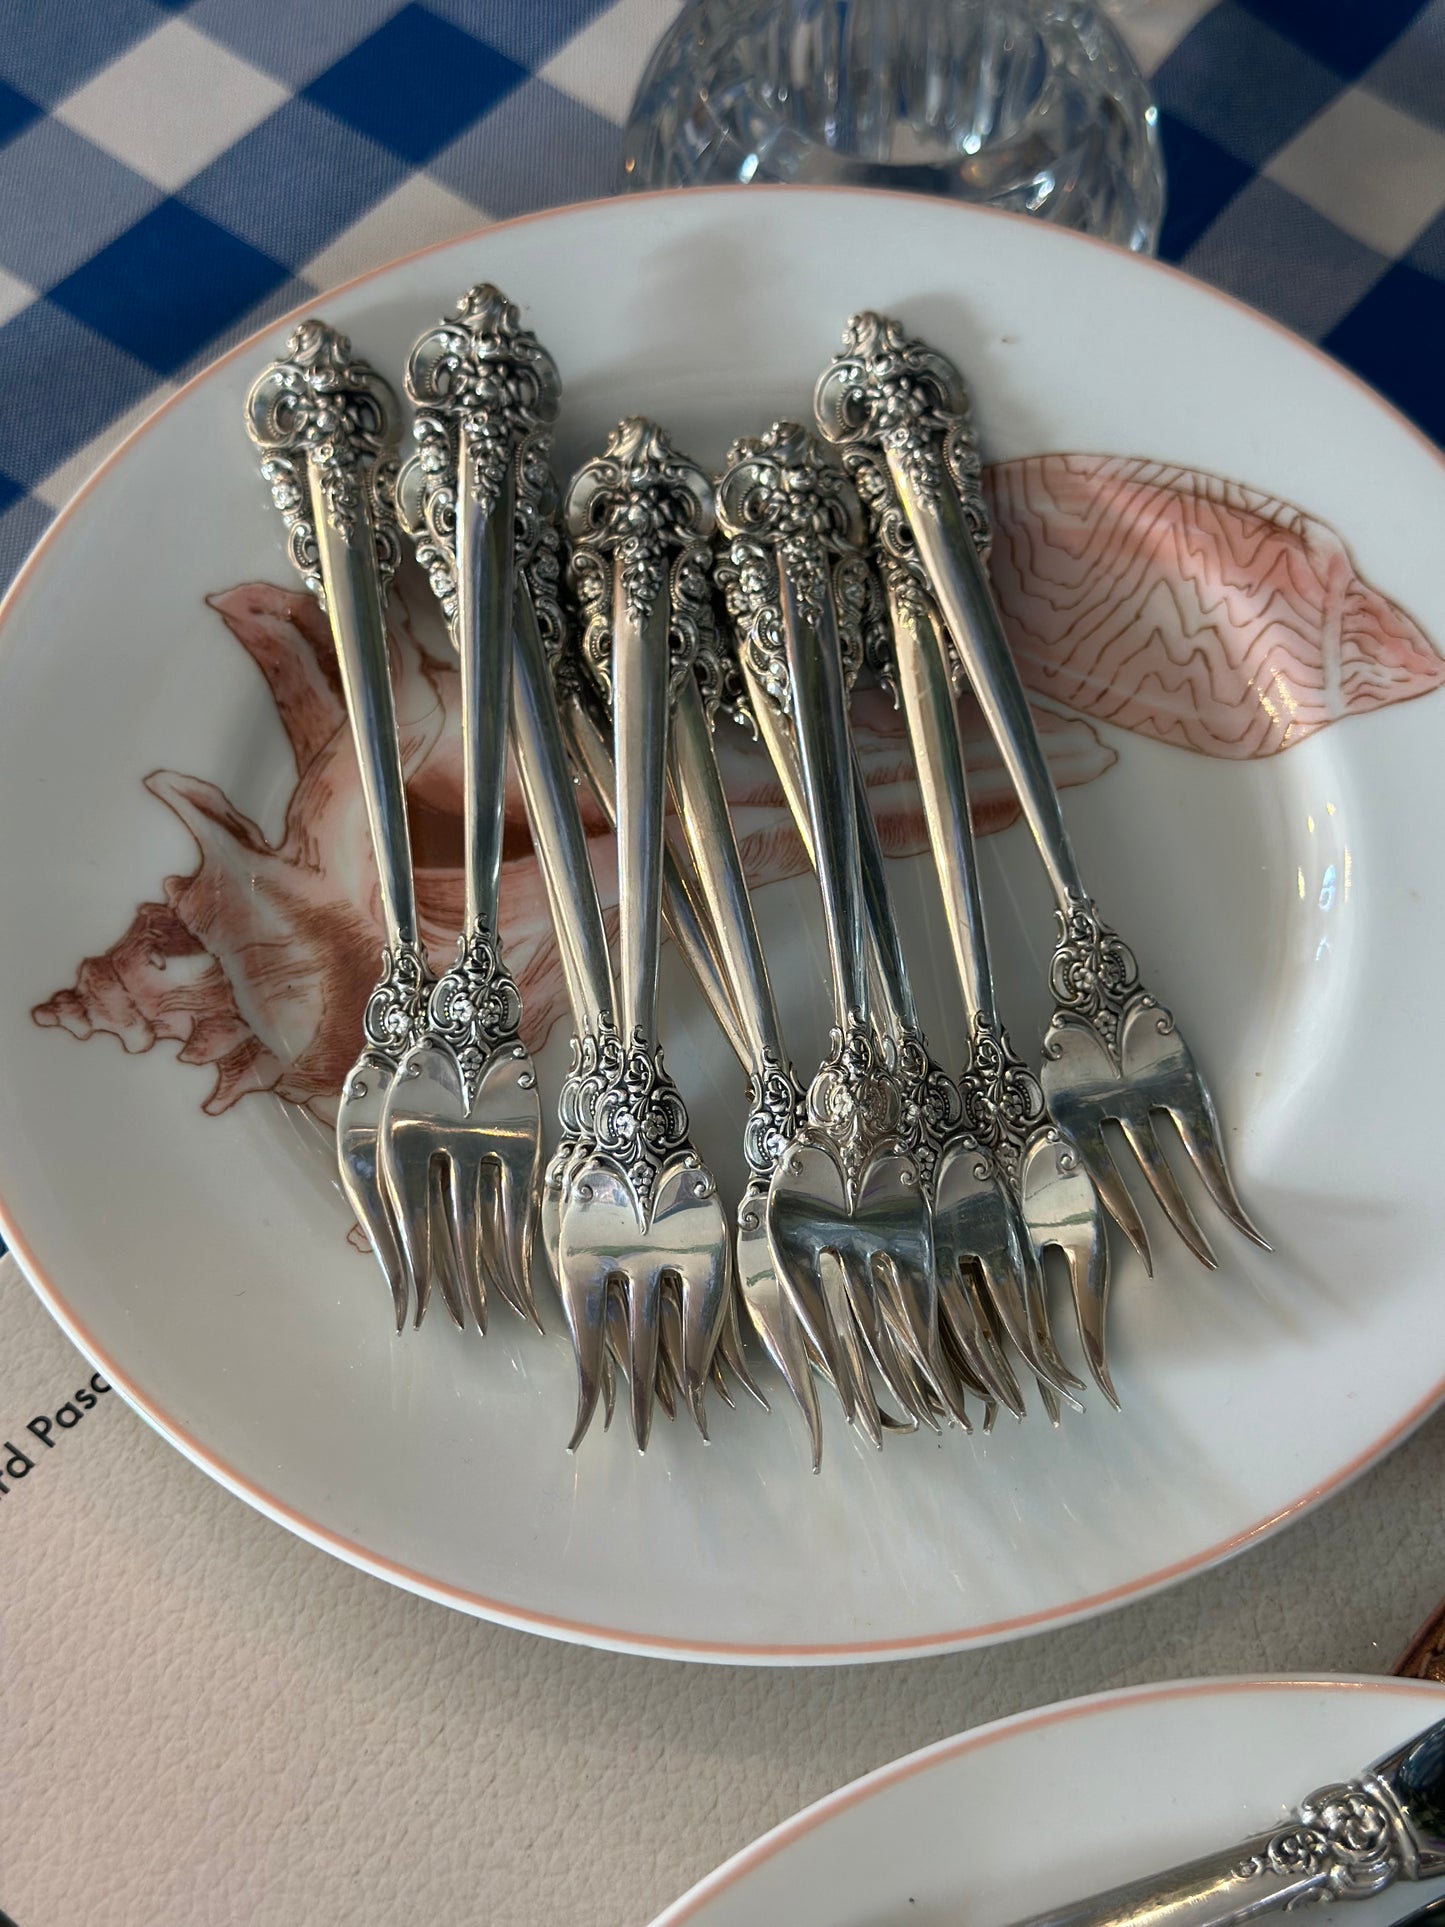 1934 Wallace Sterling, Rose Point Set 12: butter knives, forks, sugar spoons, 36 pcs. total, Wallace Sterling #L001